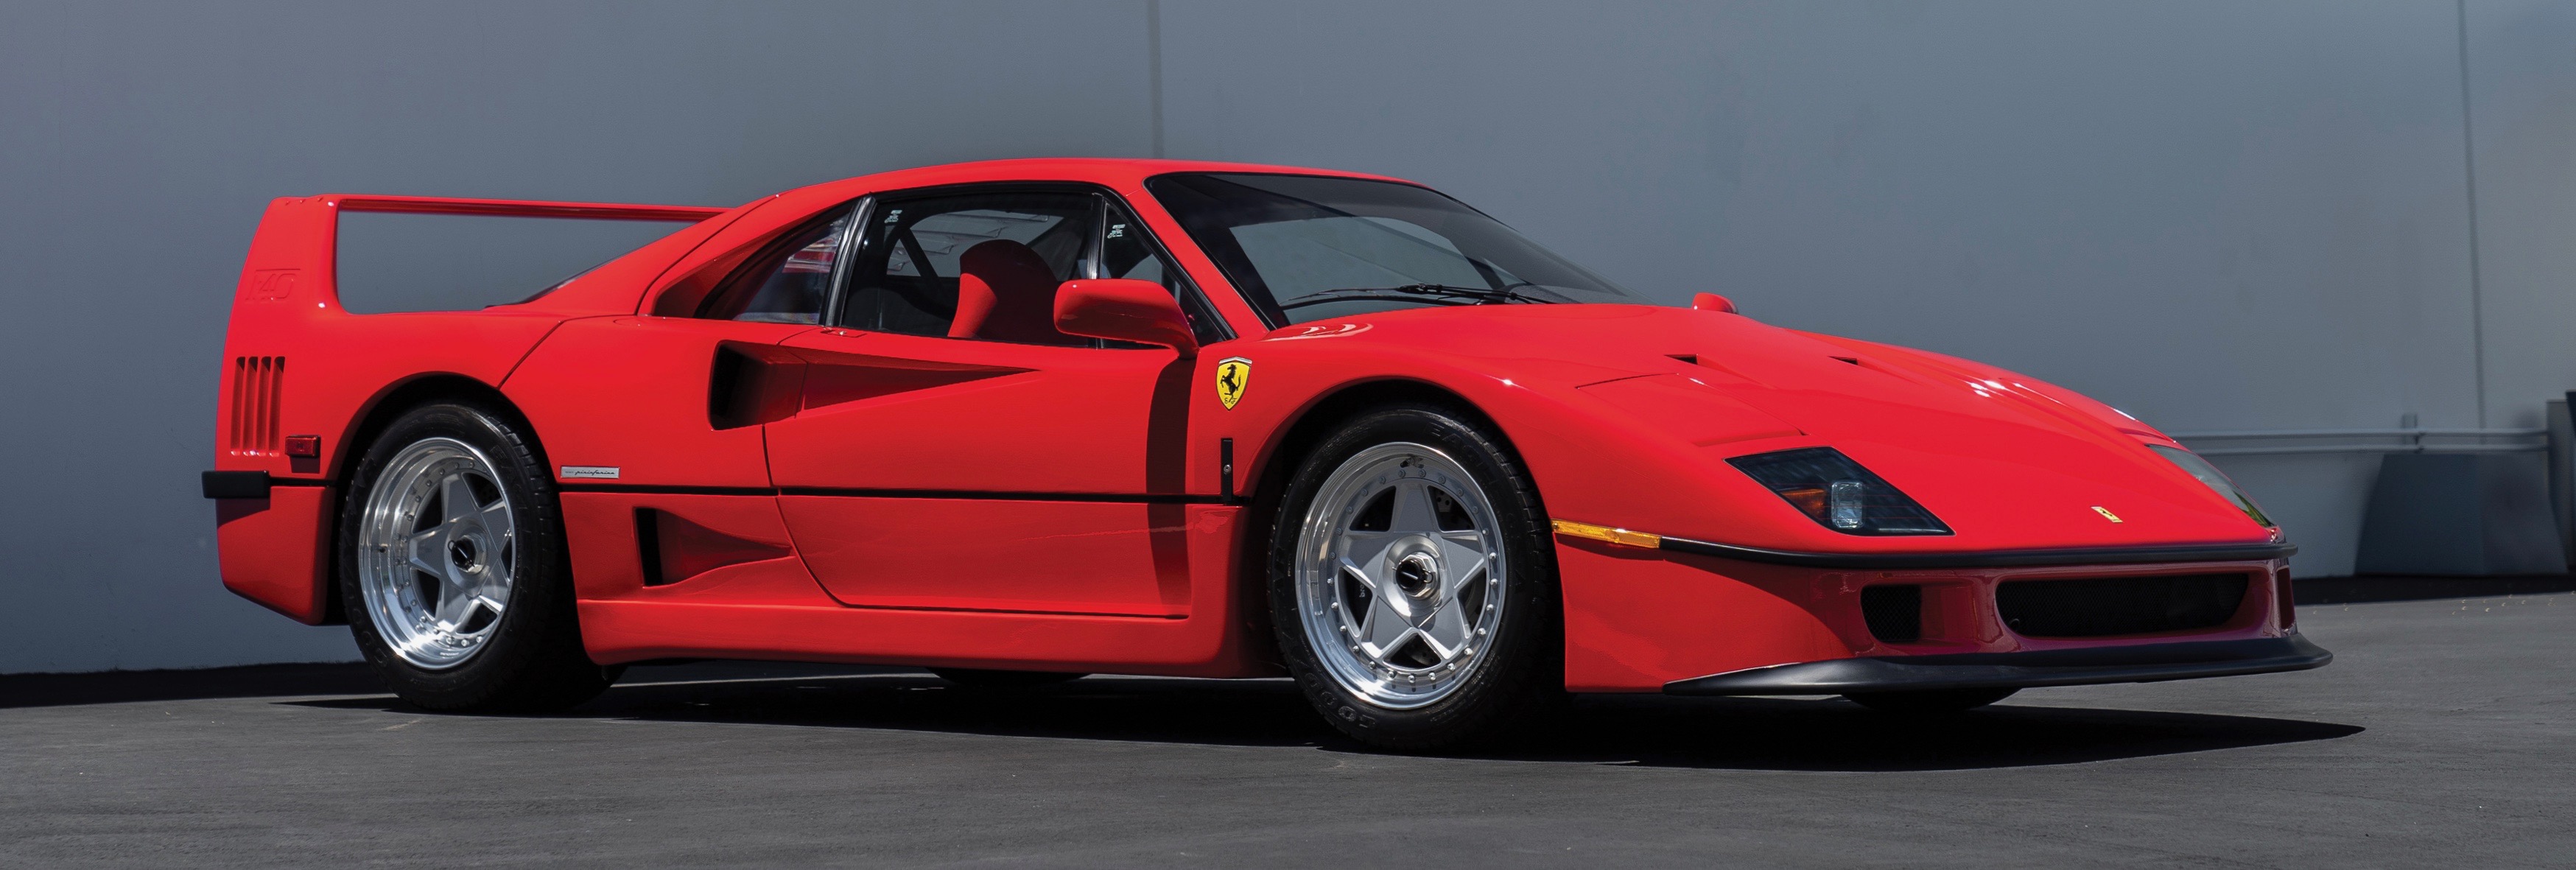 Ming Collection, 7 ‘as new’ Ming Collection Ferraris spice RM Sotheby’s Monterey auction docket, ClassicCars.com Journal